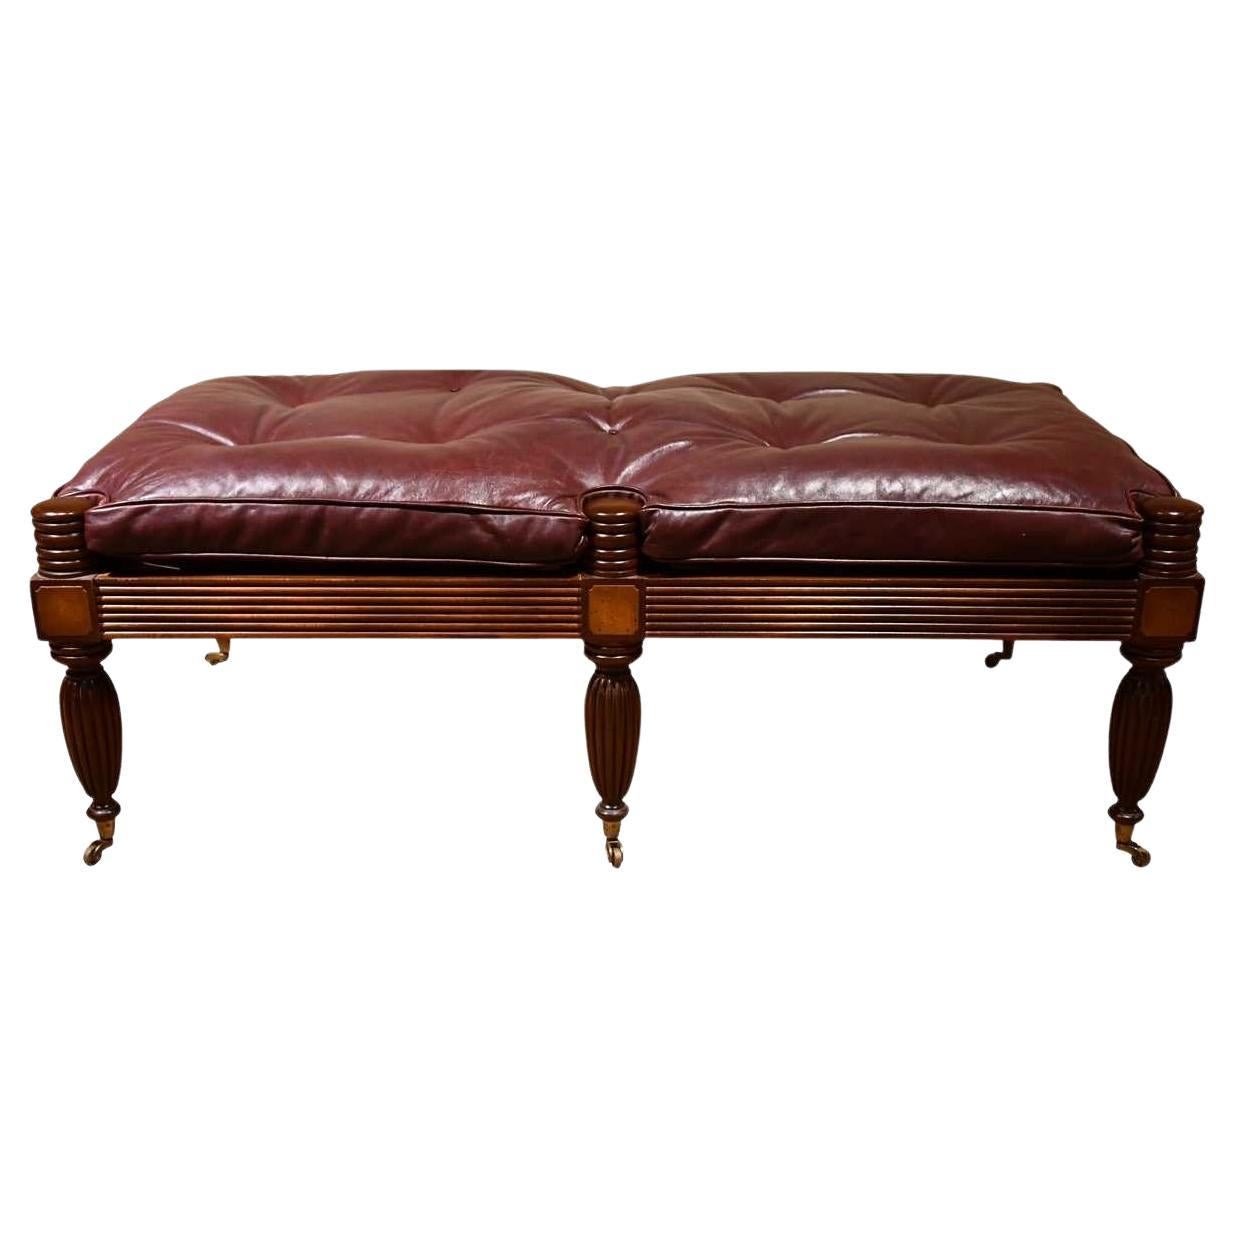 Attractive Regency Style Mahogany Bench with Button Tufted Leather Squab